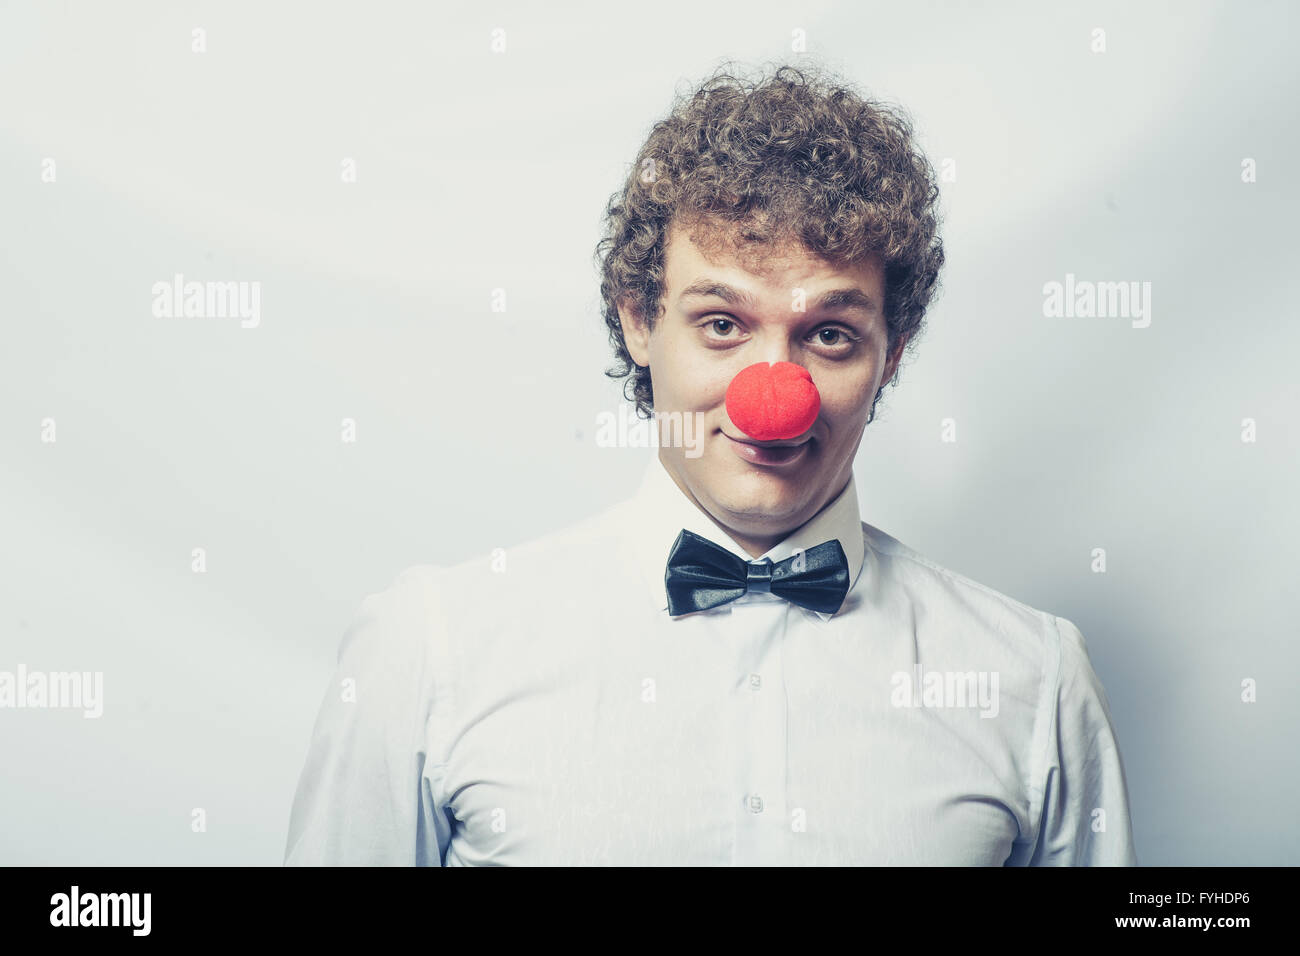 Young studen or Businessman with a red clown nose. Studio shot. Head and shoulders. Stock Photo